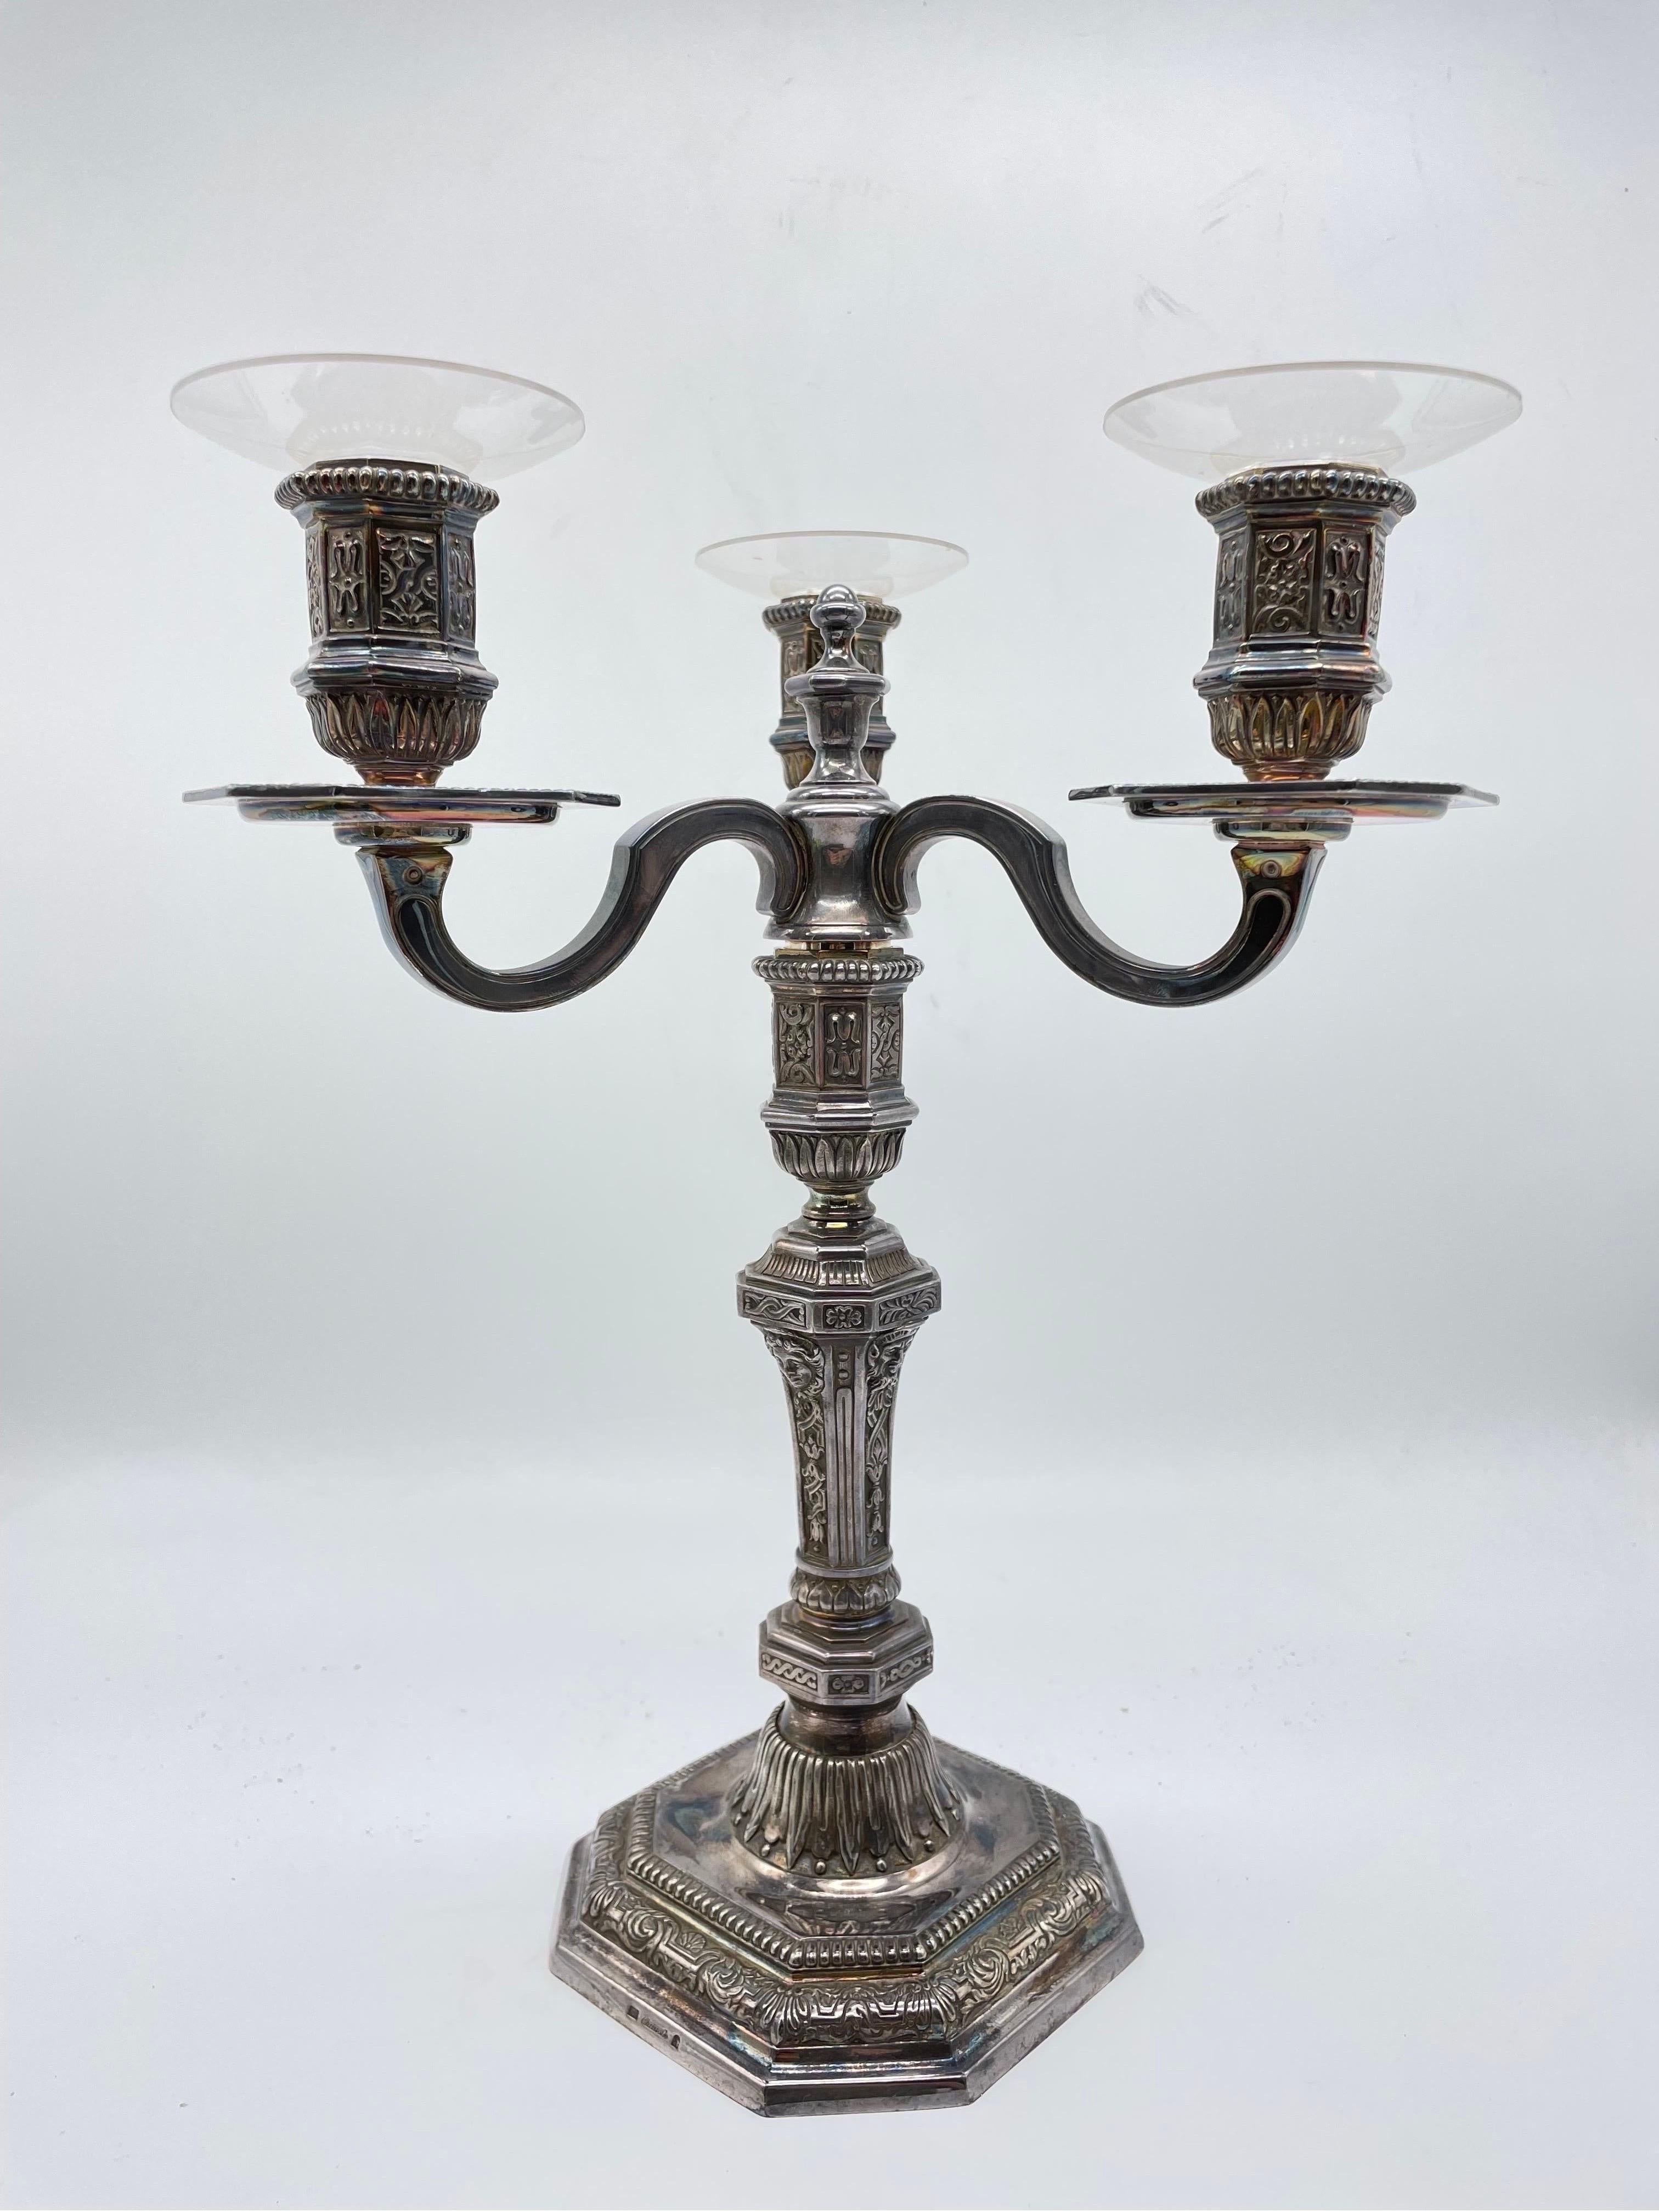 Noble original Christofle candlestick

Multi-profiled base, shaft and grommets. 3 curved light arms. Extremely high quality and noble processing. With patina. If necessary, the candlestick can be cleaned, then it shines like new.

Candlestick,